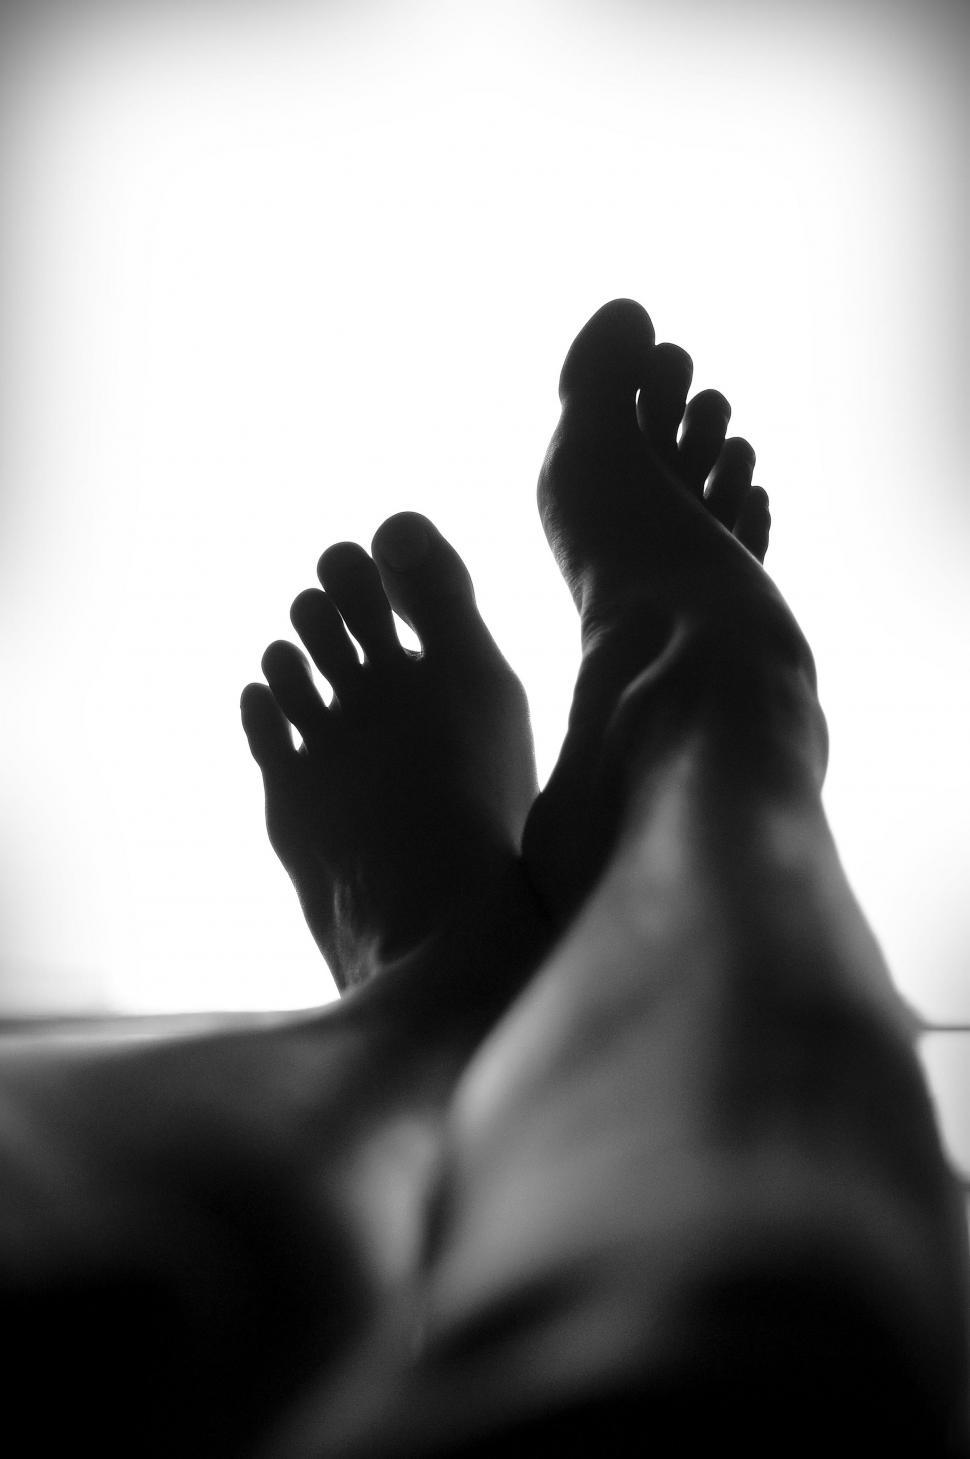 Free Image of Bare Feet of a Person 